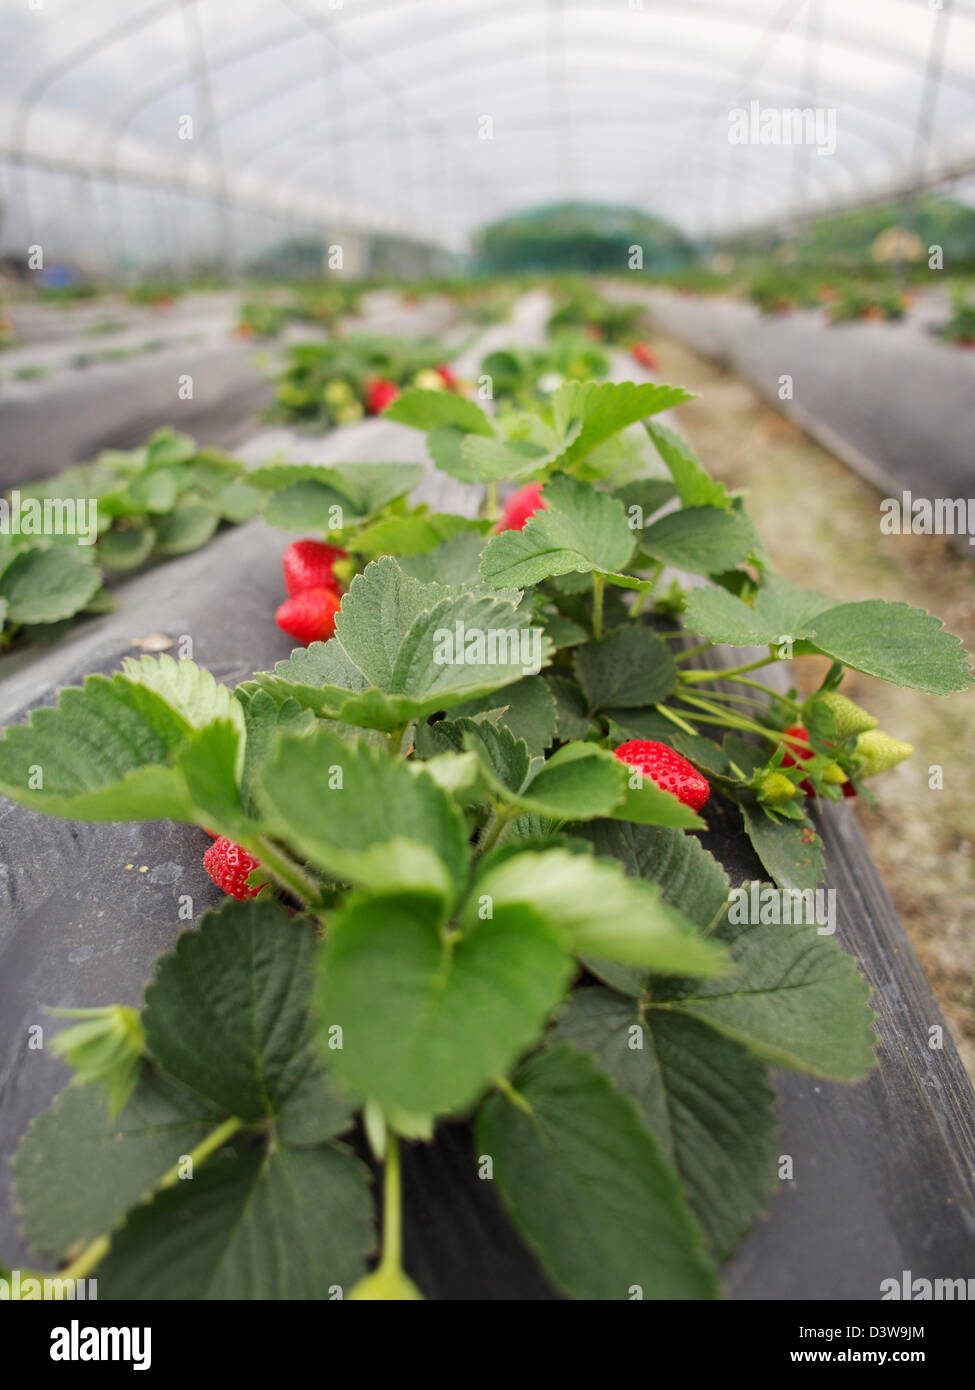 Pick-your-eigenes Obst und Gemüse in hok tau Country Park, New Territories, Hong Kong Stockfoto